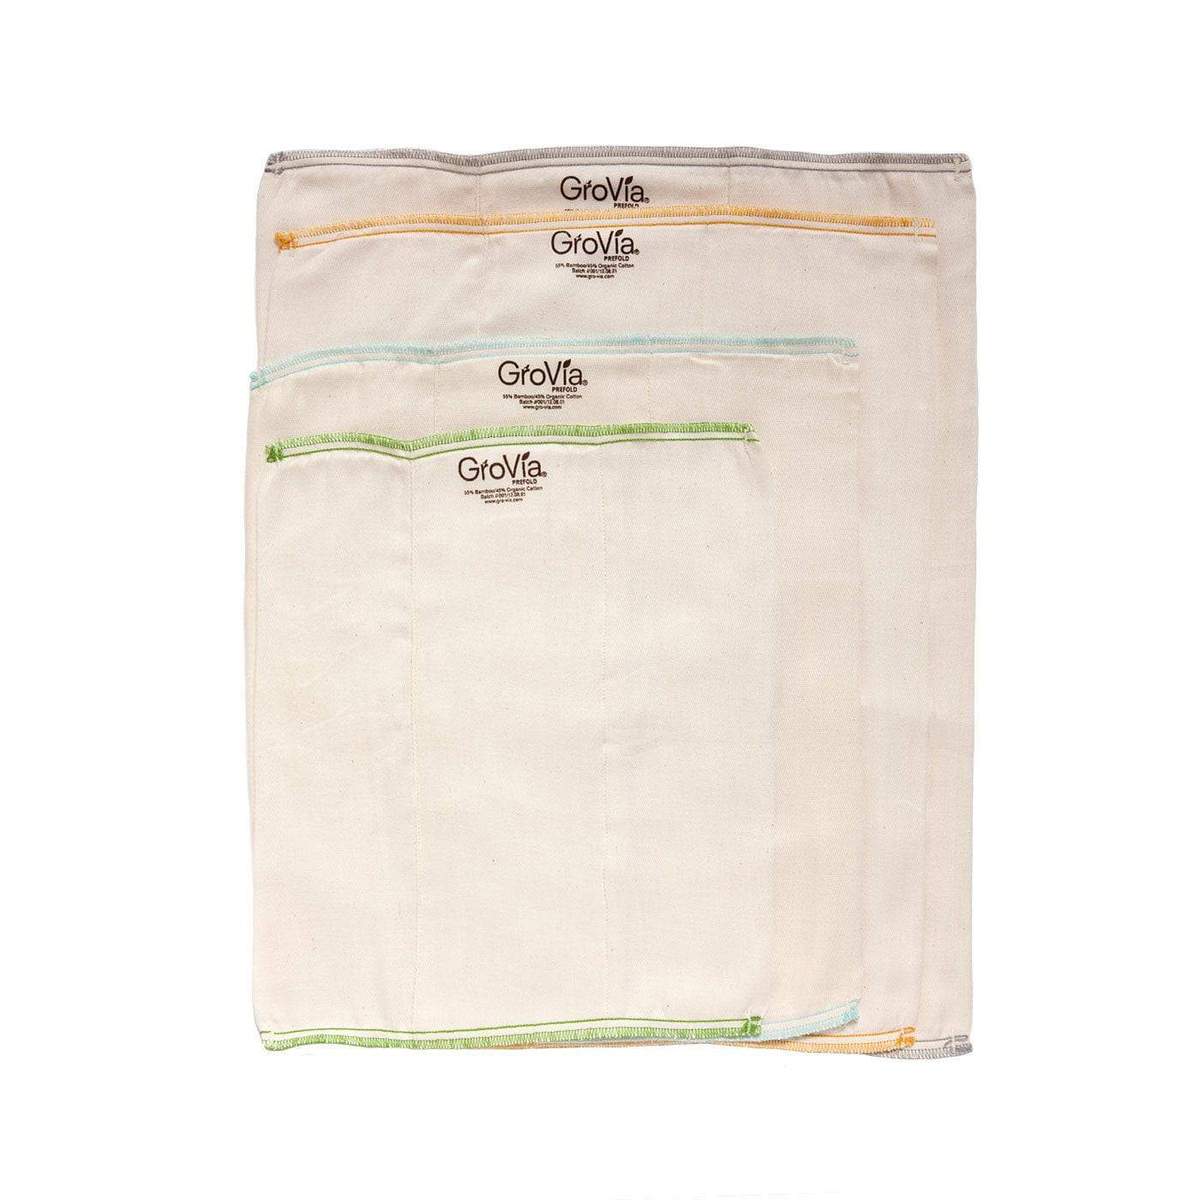 GroVia - Bamboo Prefold Cloth Diapers in a pack of 3